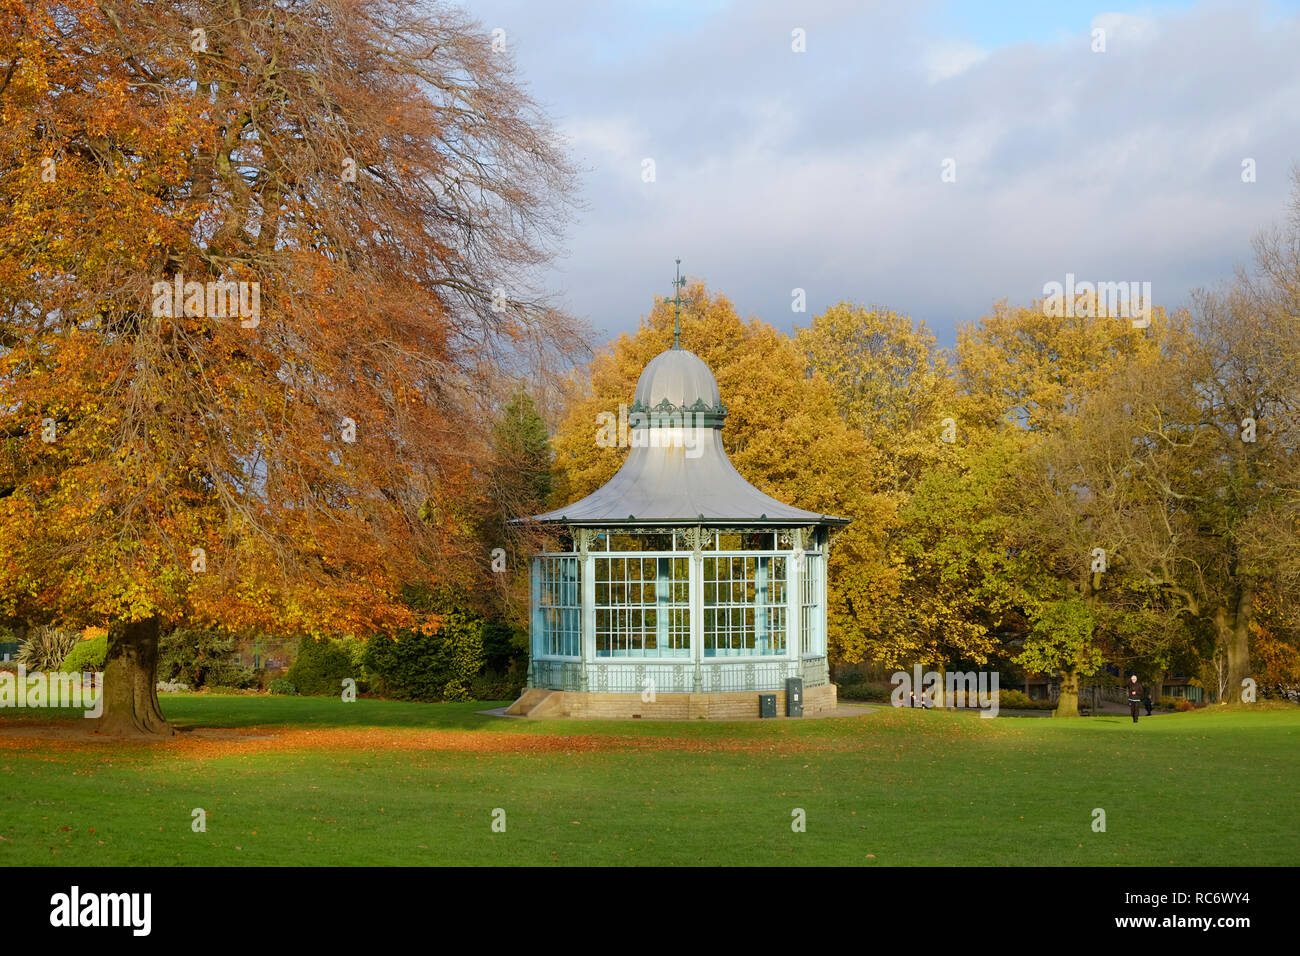 Victorian Bandstand at Weston Park, Sheffield, UK in autumn Stock Photo